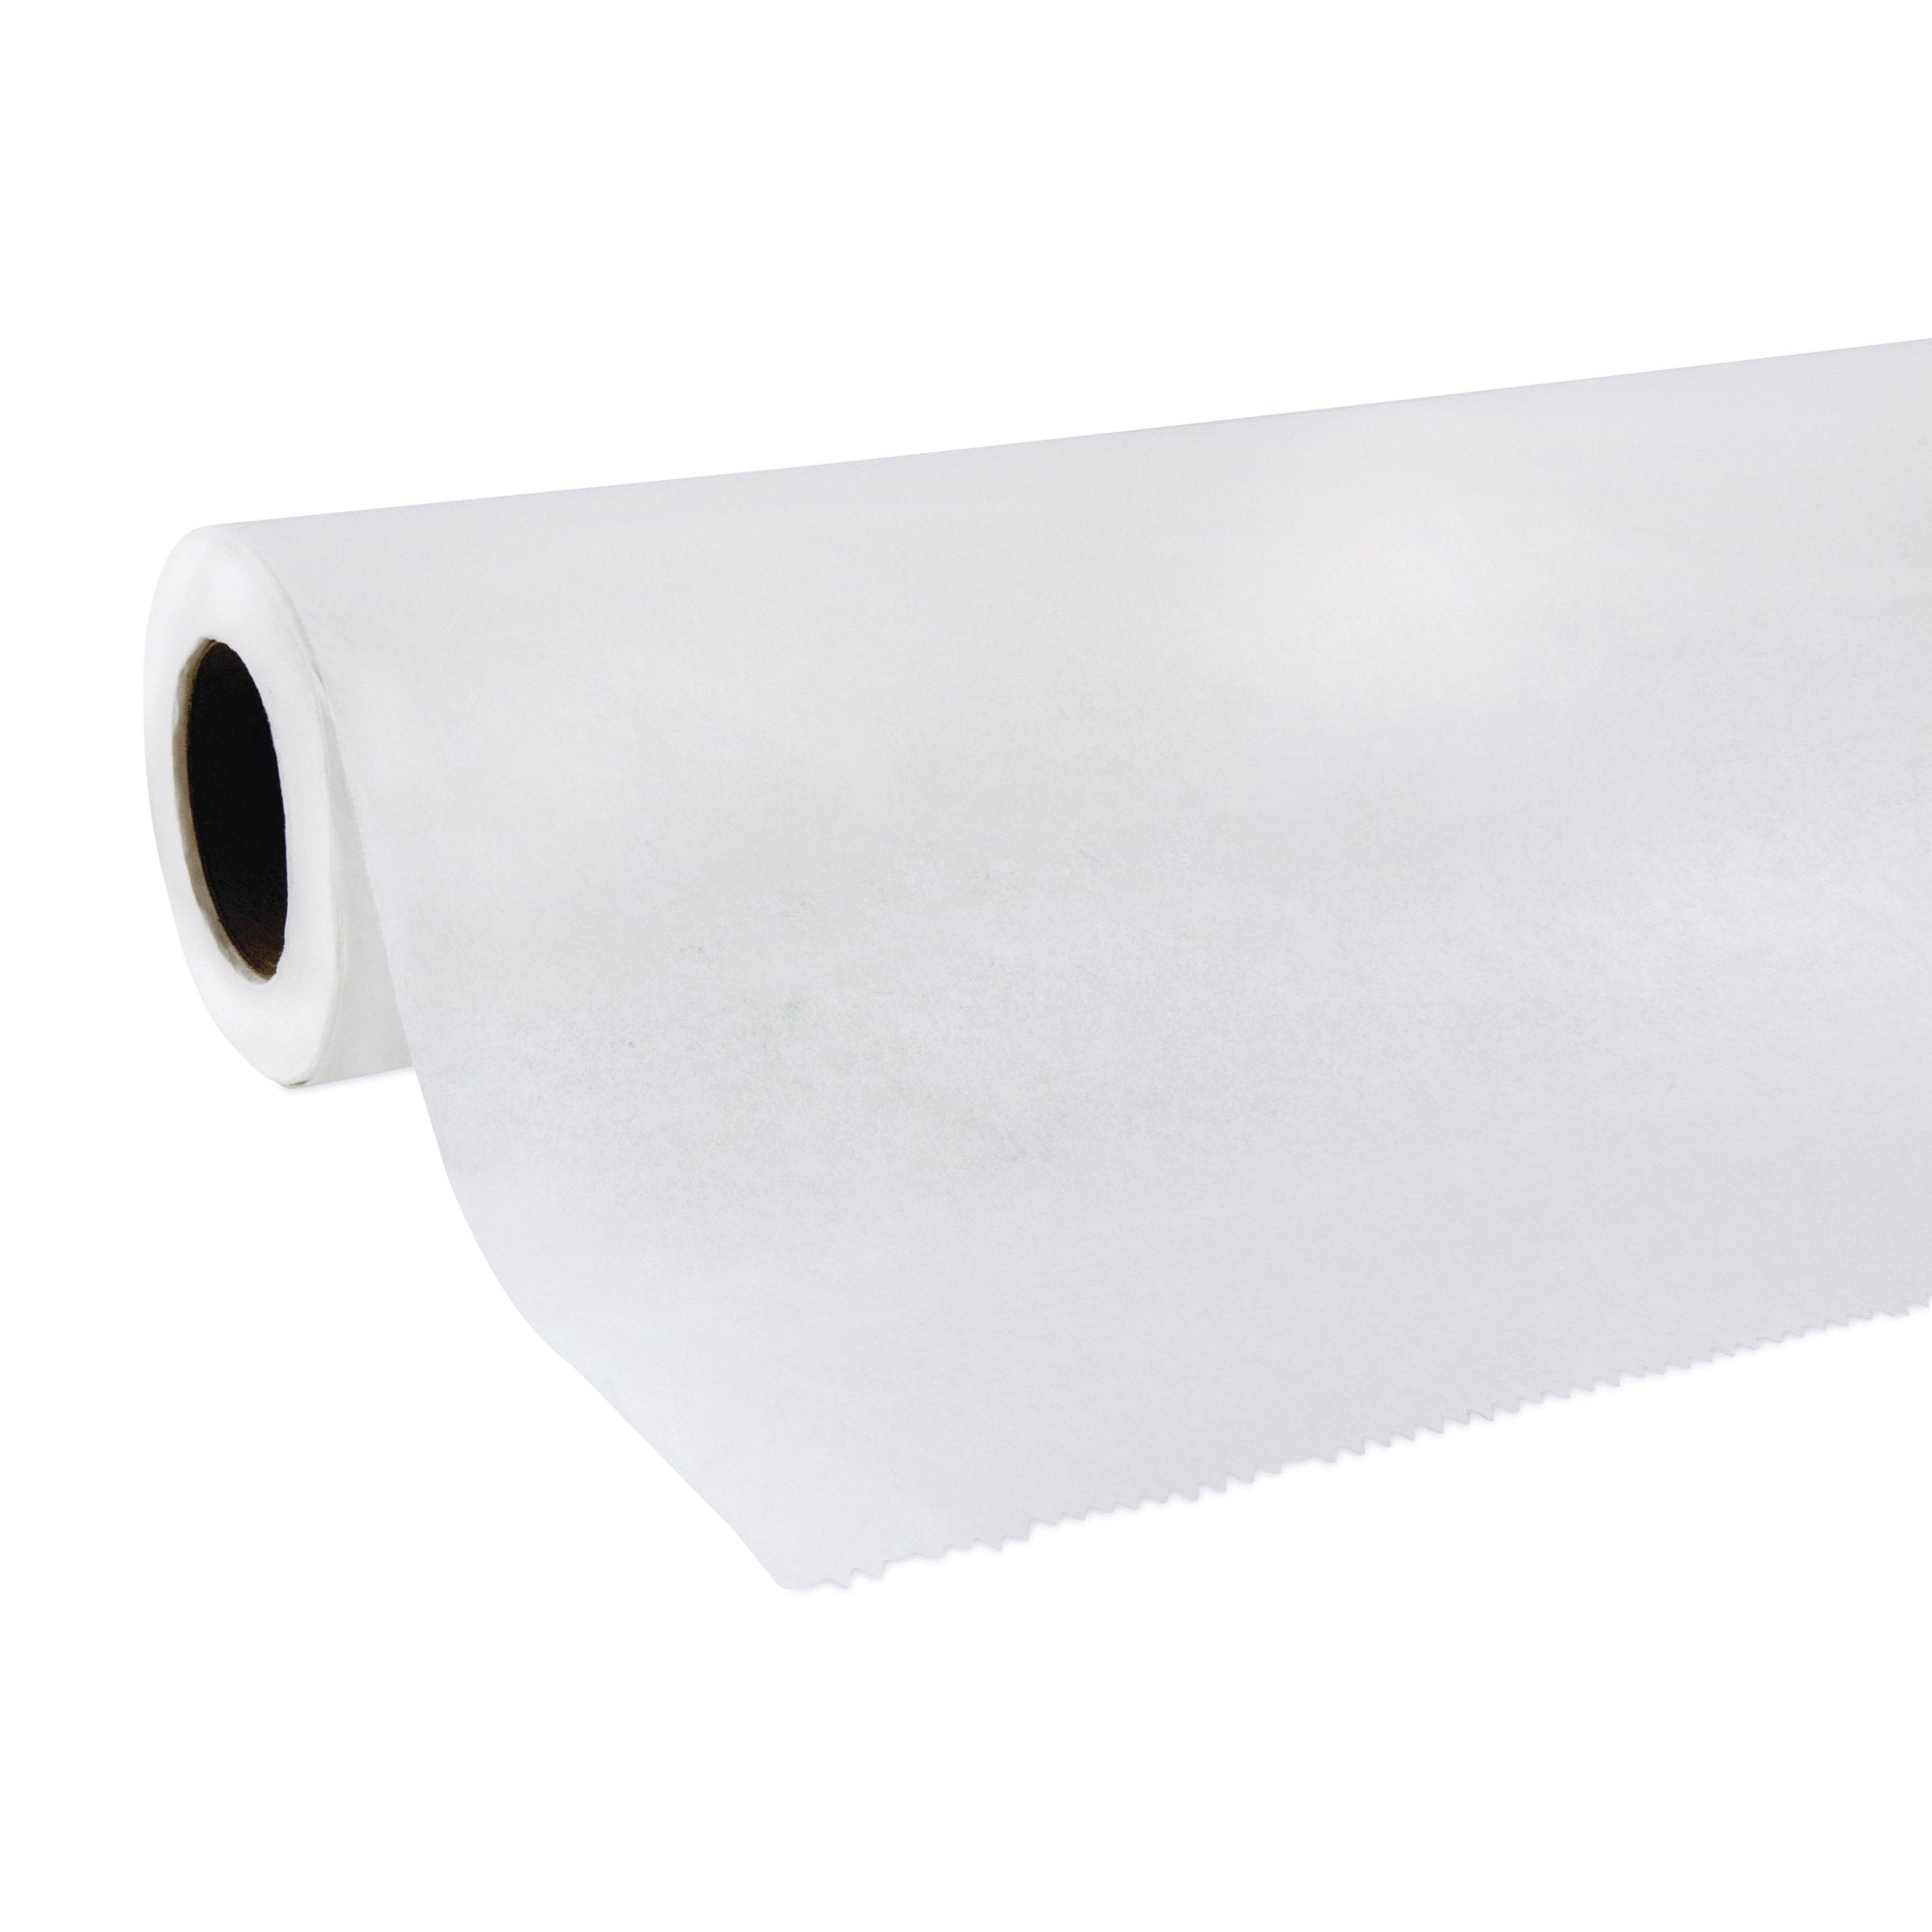 Table Paper McKesson 18 Inch Width White Smooth